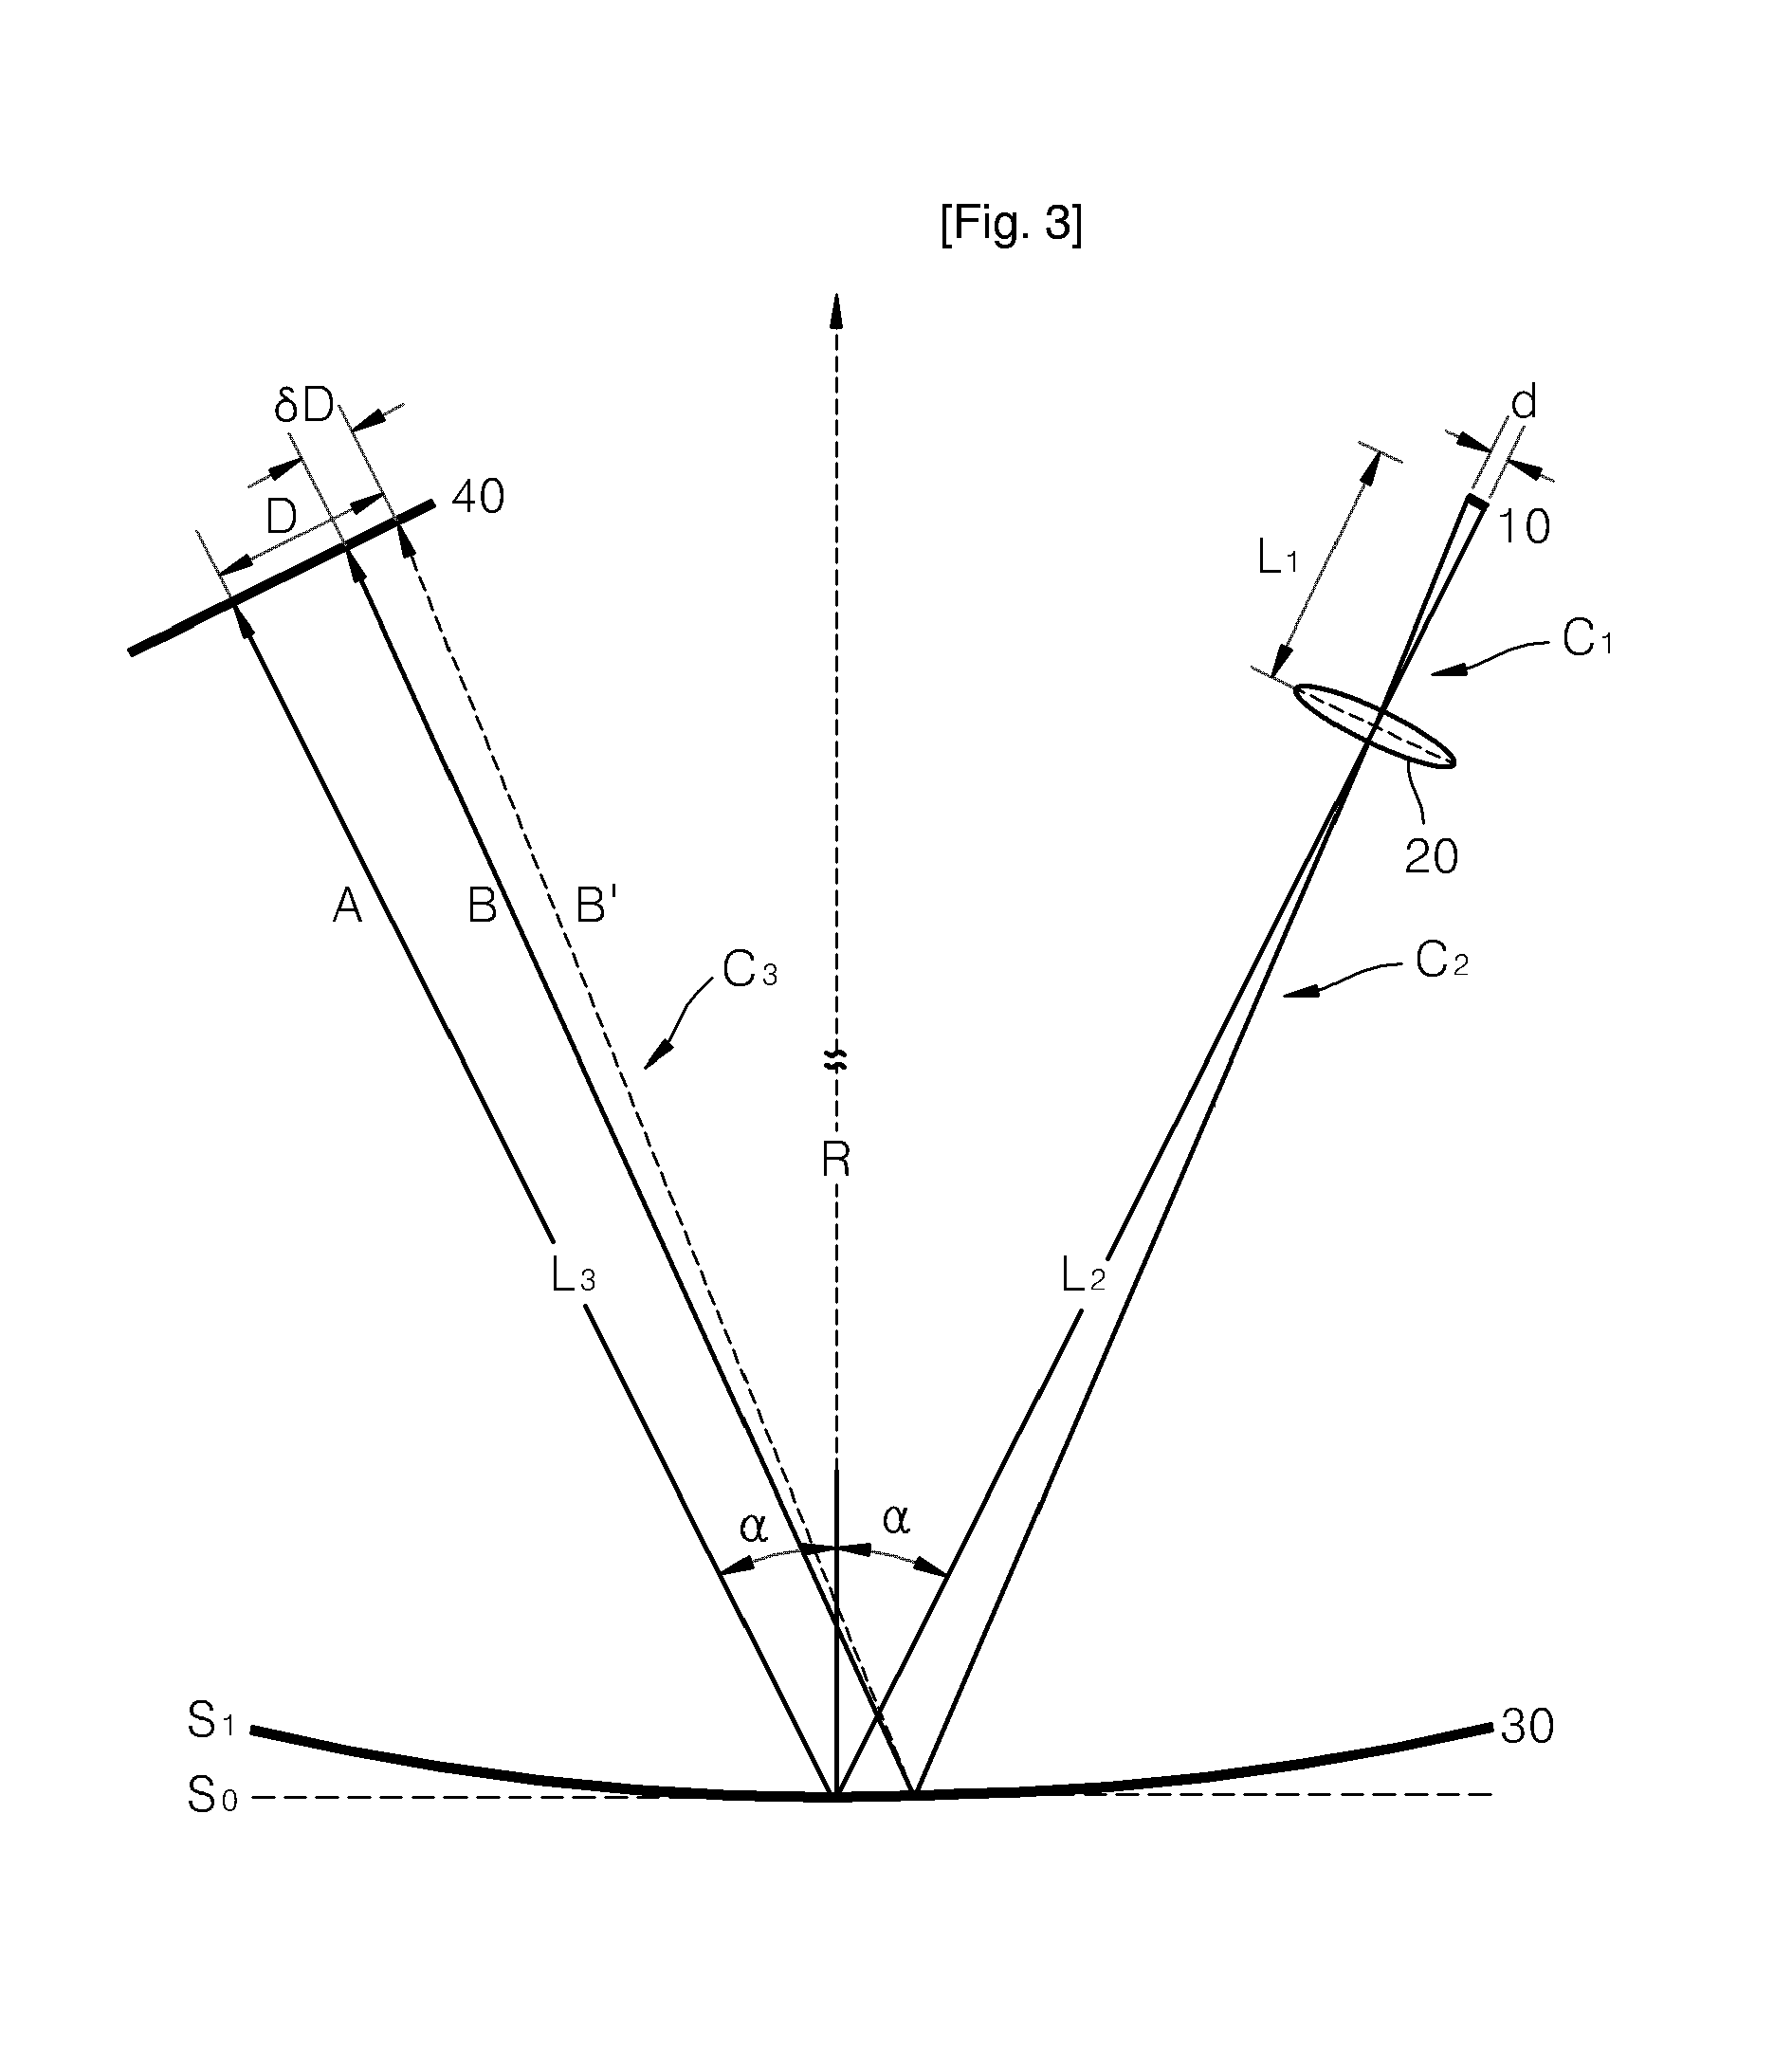 Apparatus and Method for Measuring Curvature Using Multiple Beams